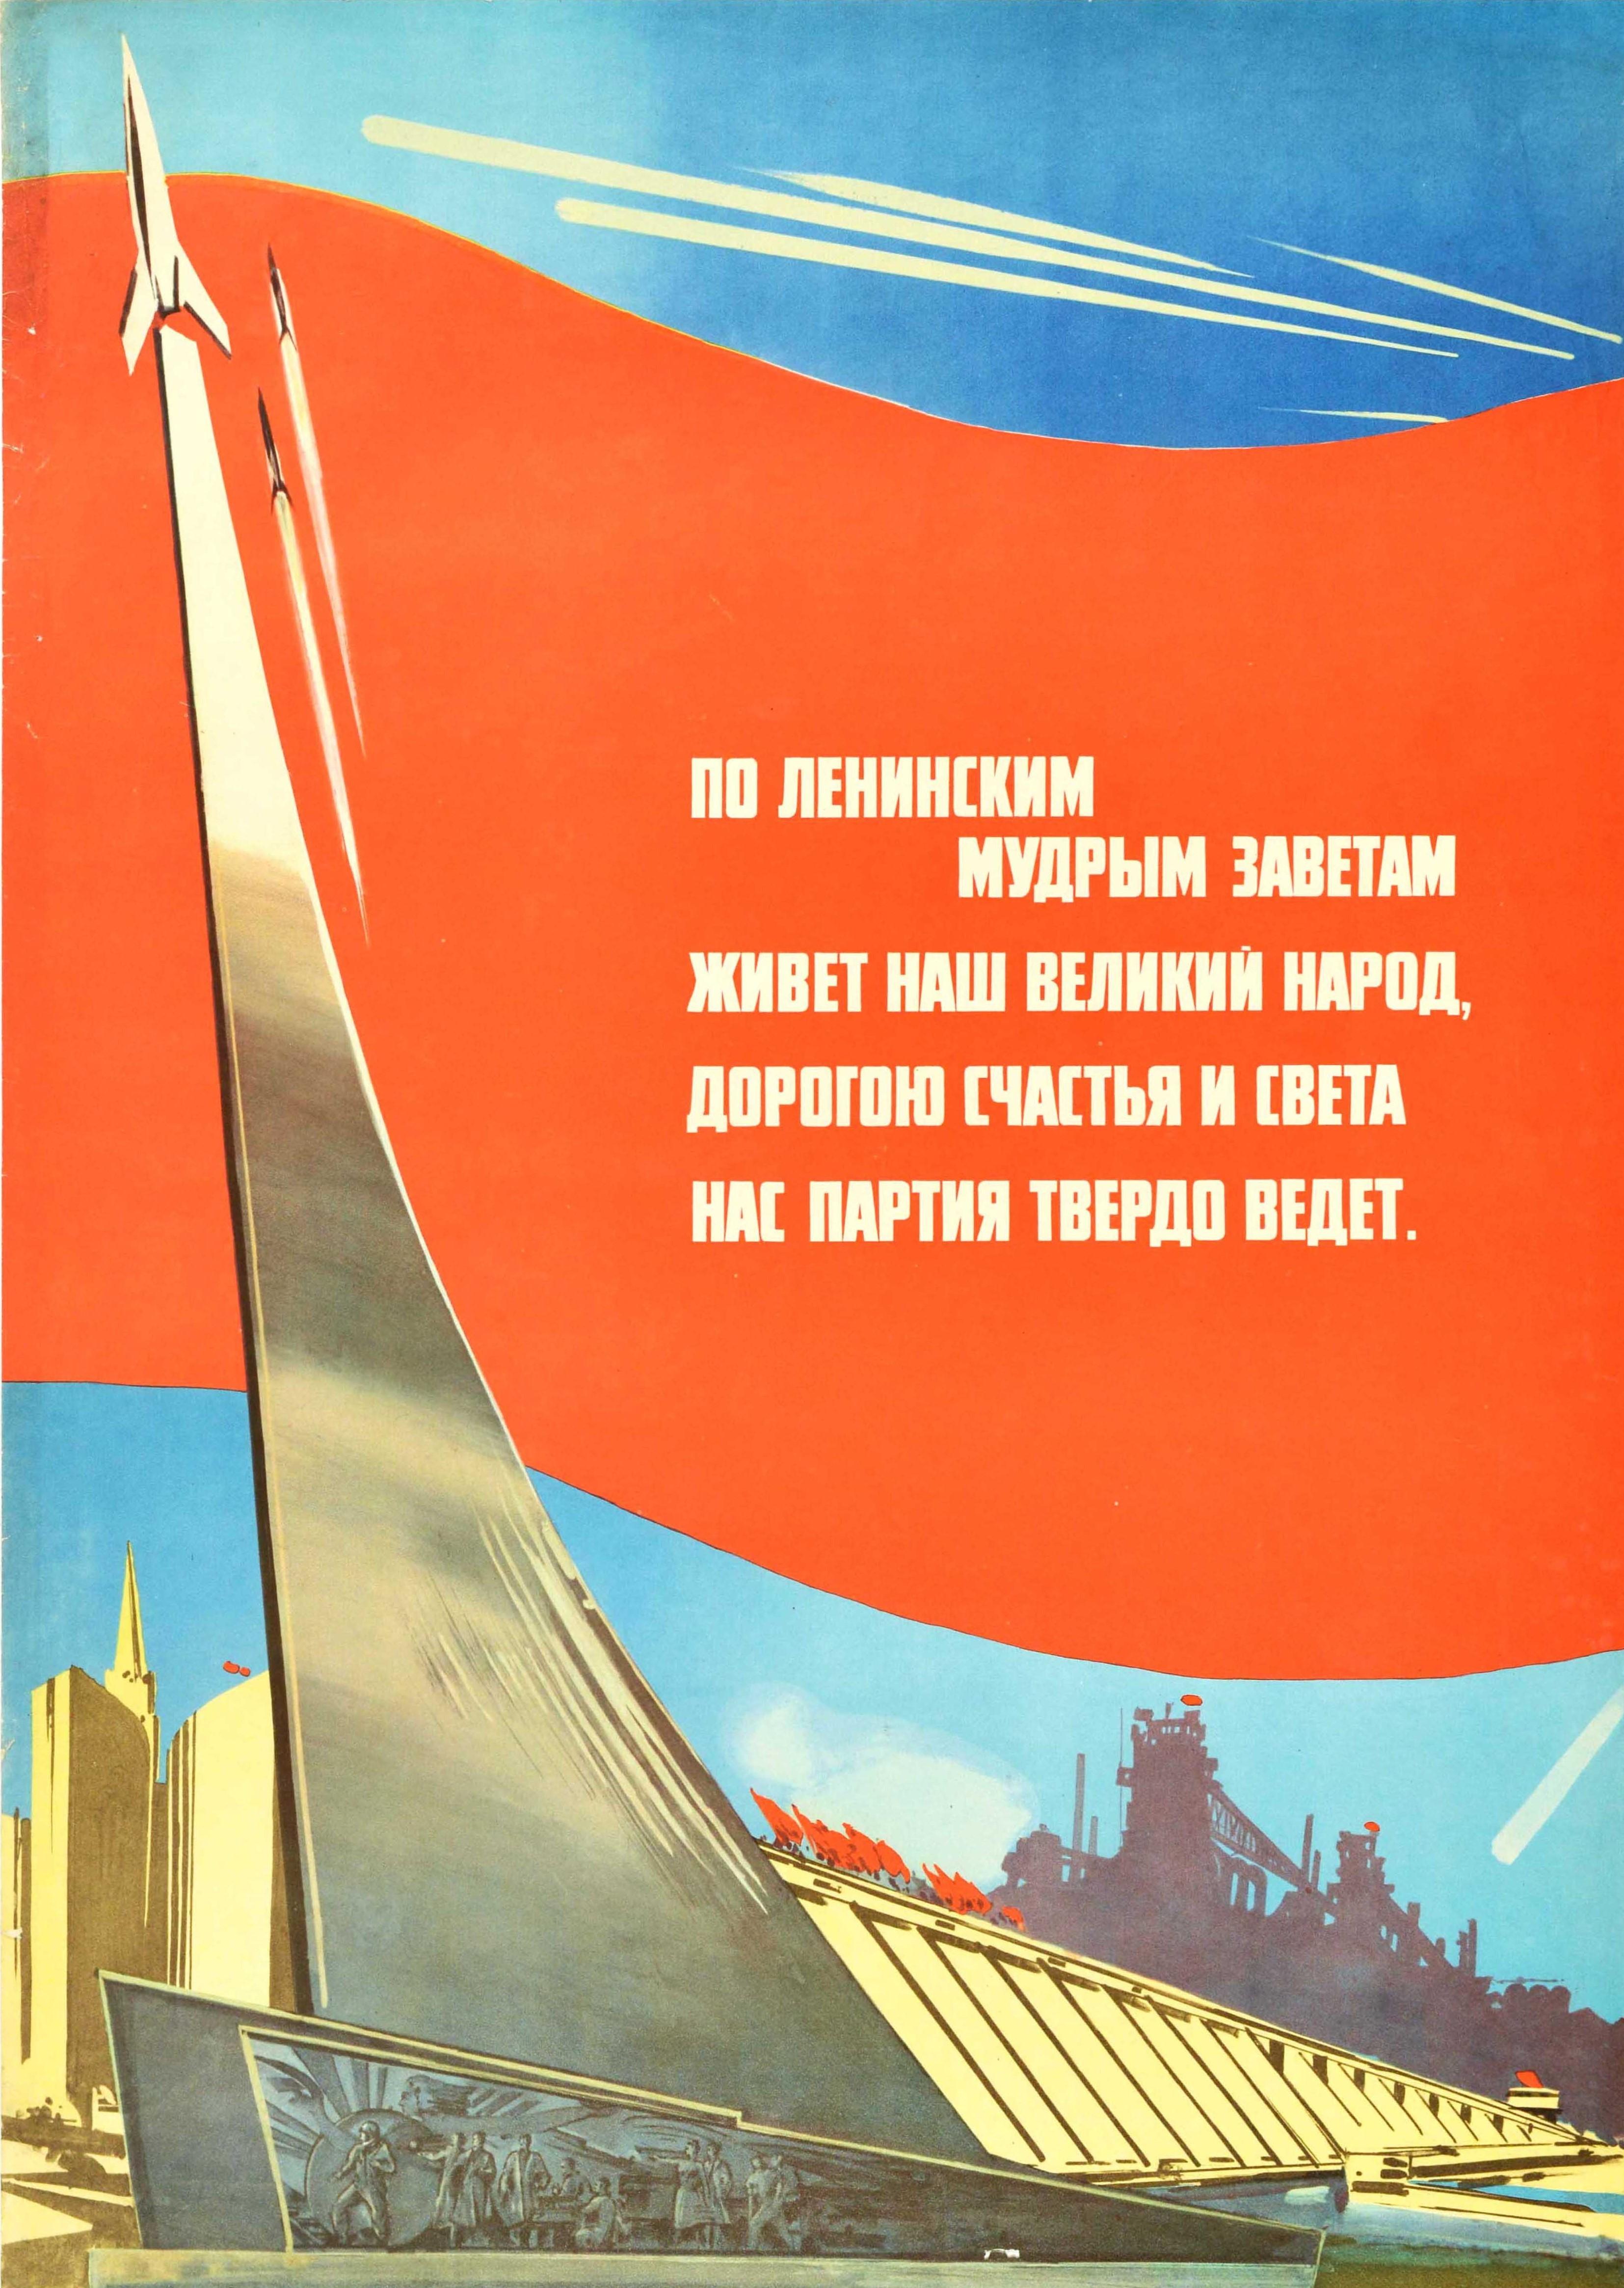 Original vintage Soviet propaganda poster - Our great people live according to Lenin's wise commandments The party is firmly leading us along the path of happiness and light - featuring a dynamic illustration of the Monument of the Conquerors of